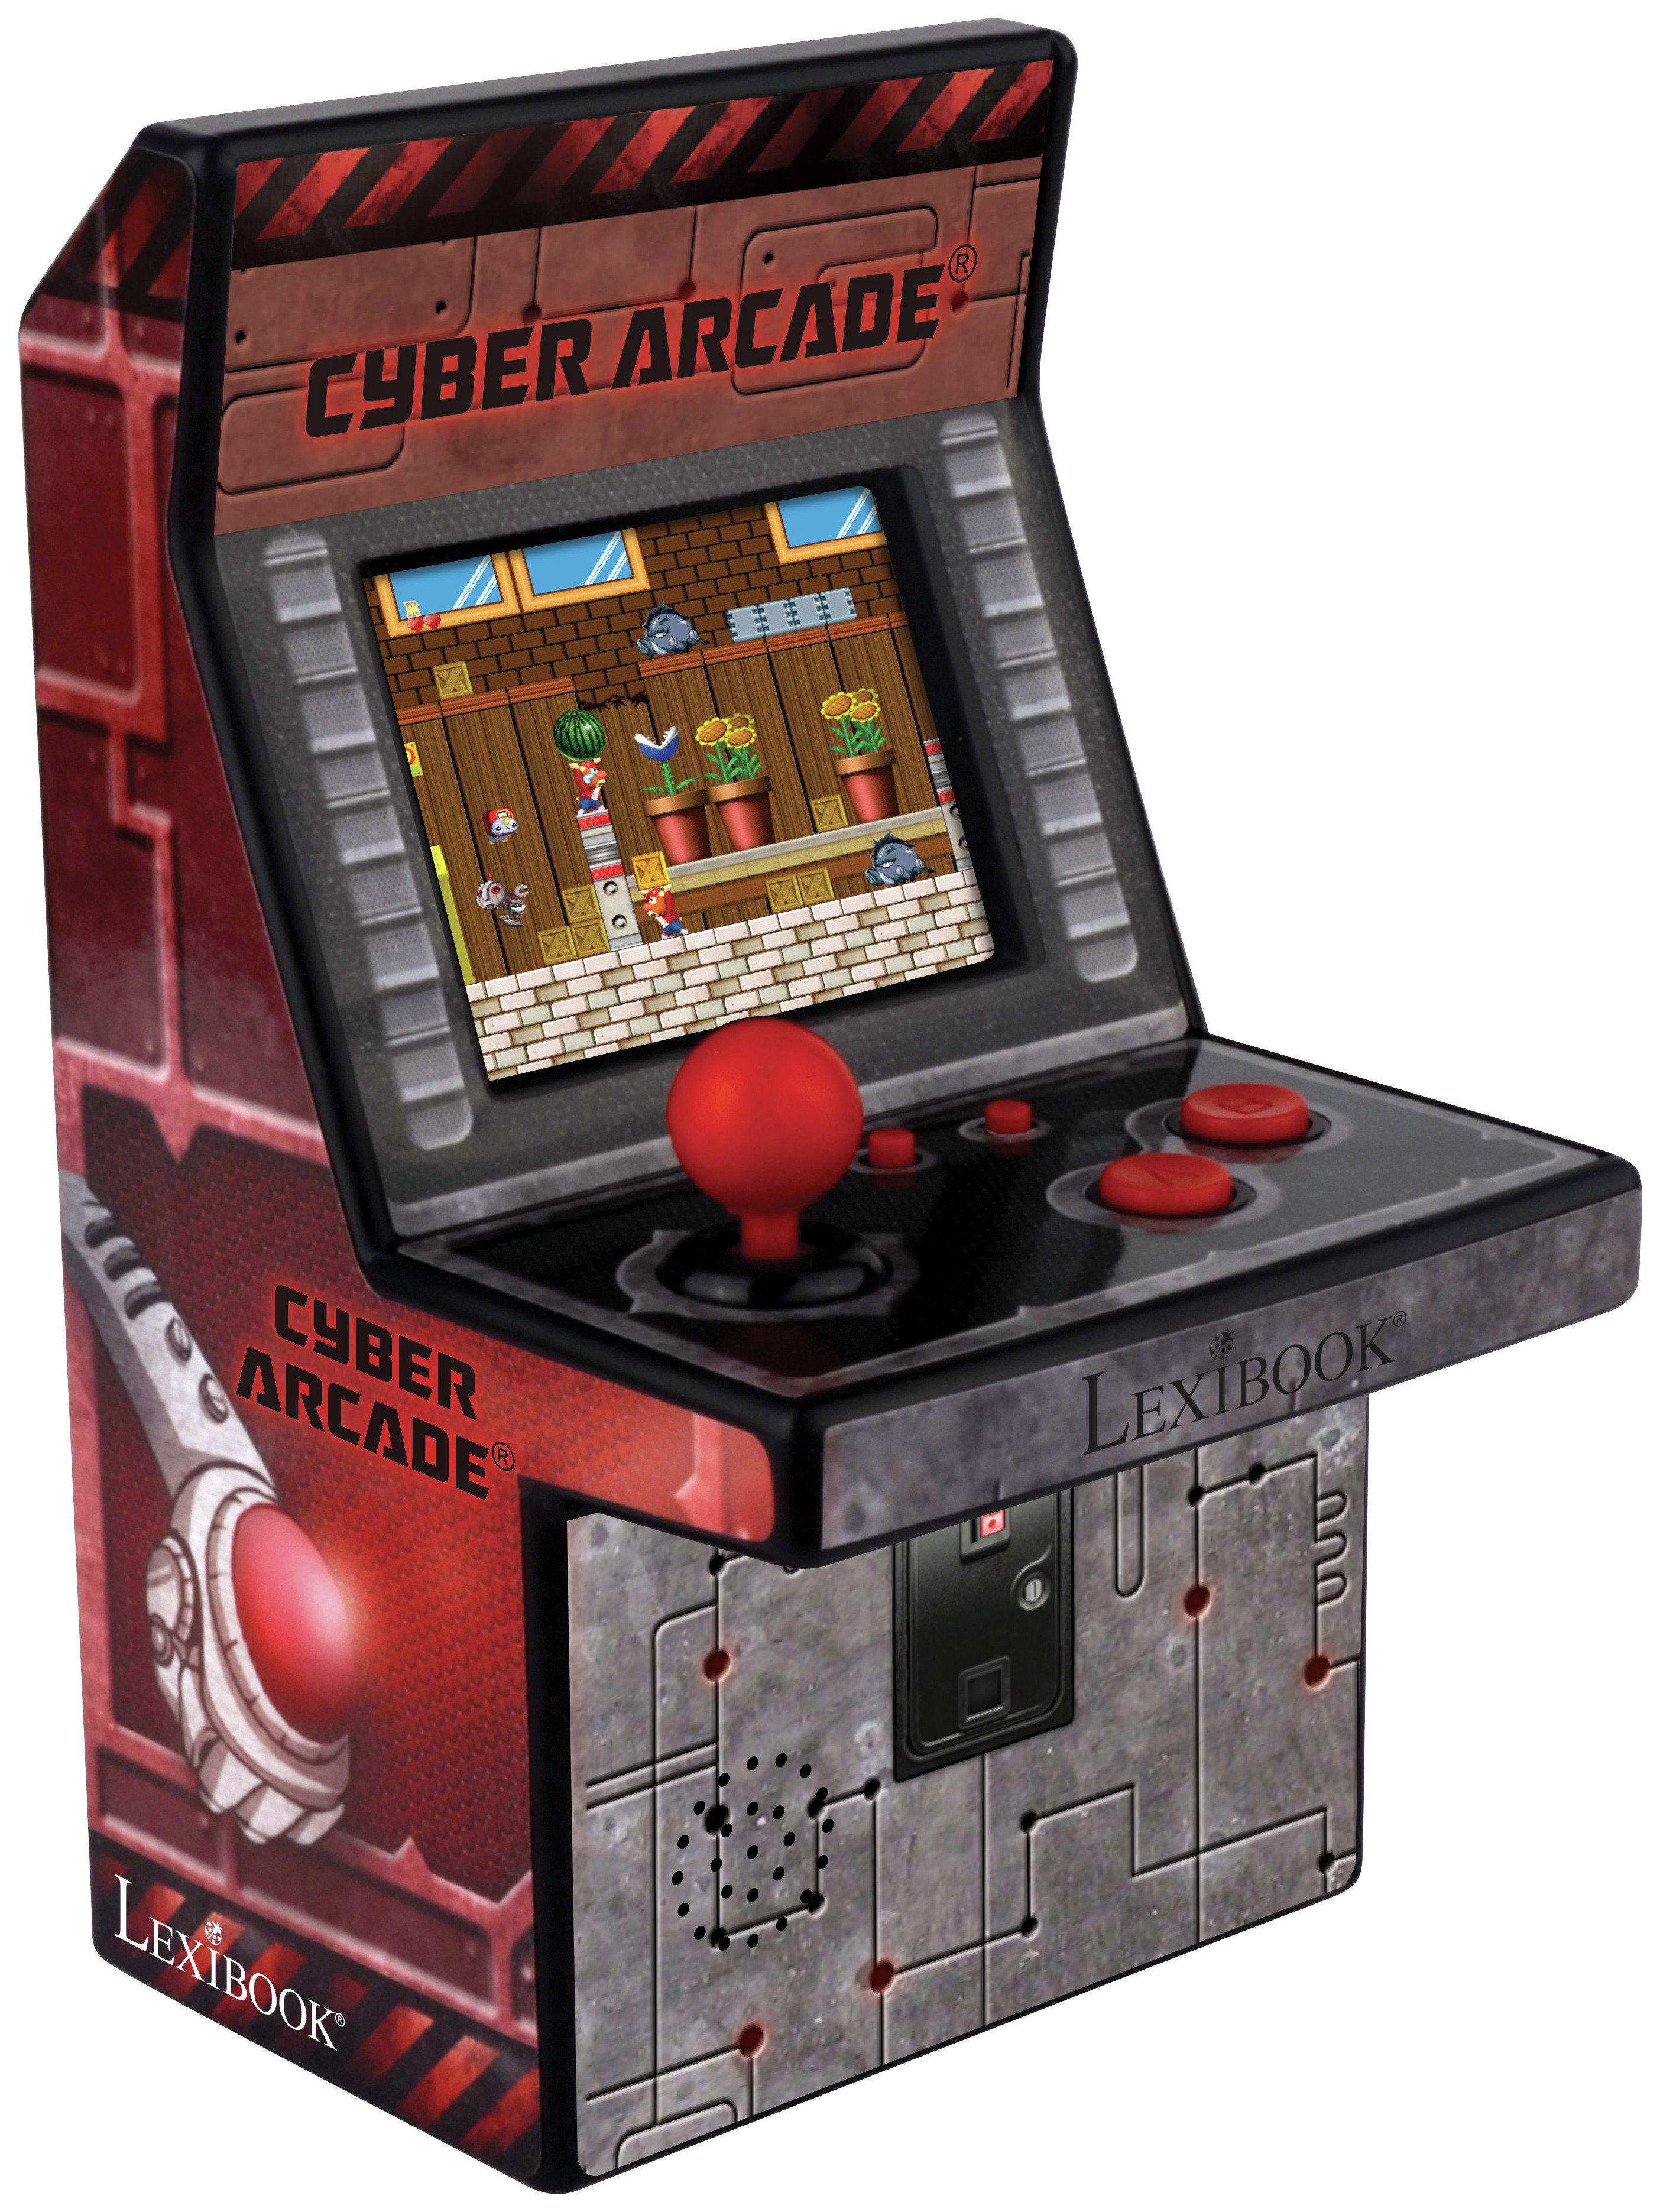 Lexibook Arcade Console with 240 Games